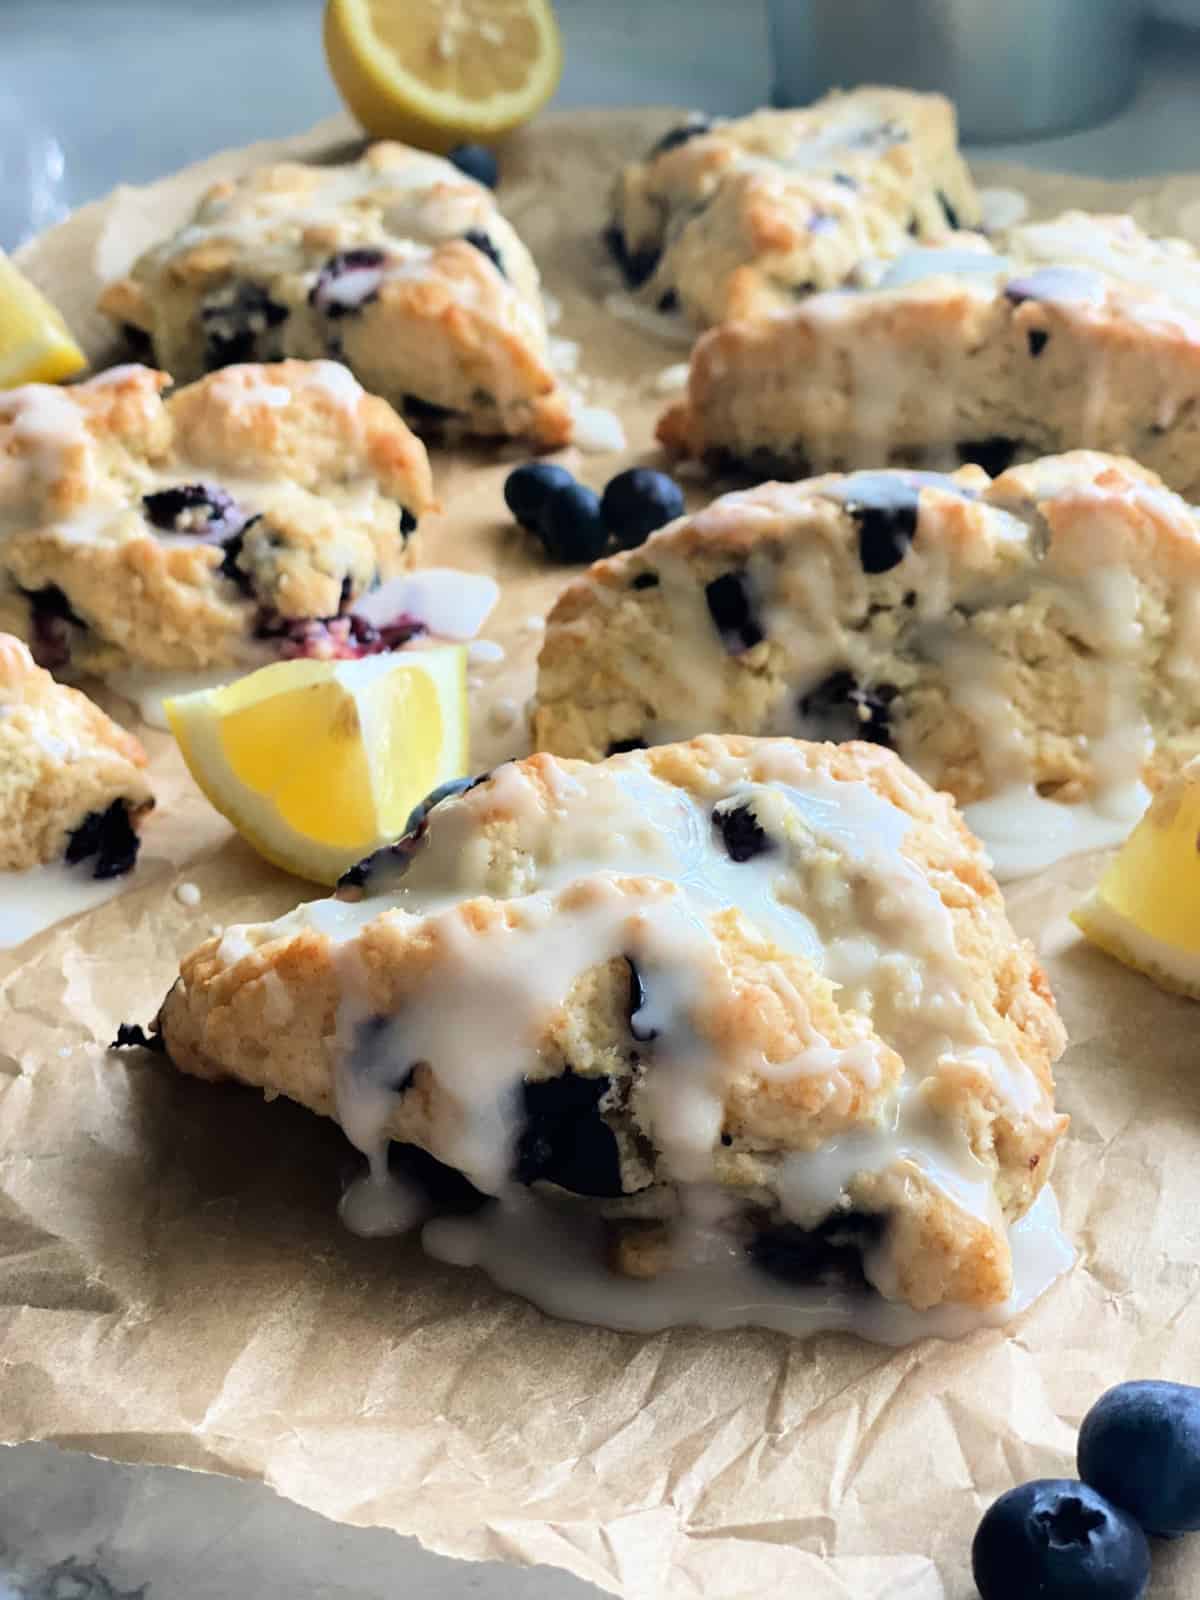 Baked blueberry scones on brown paper with glaze.